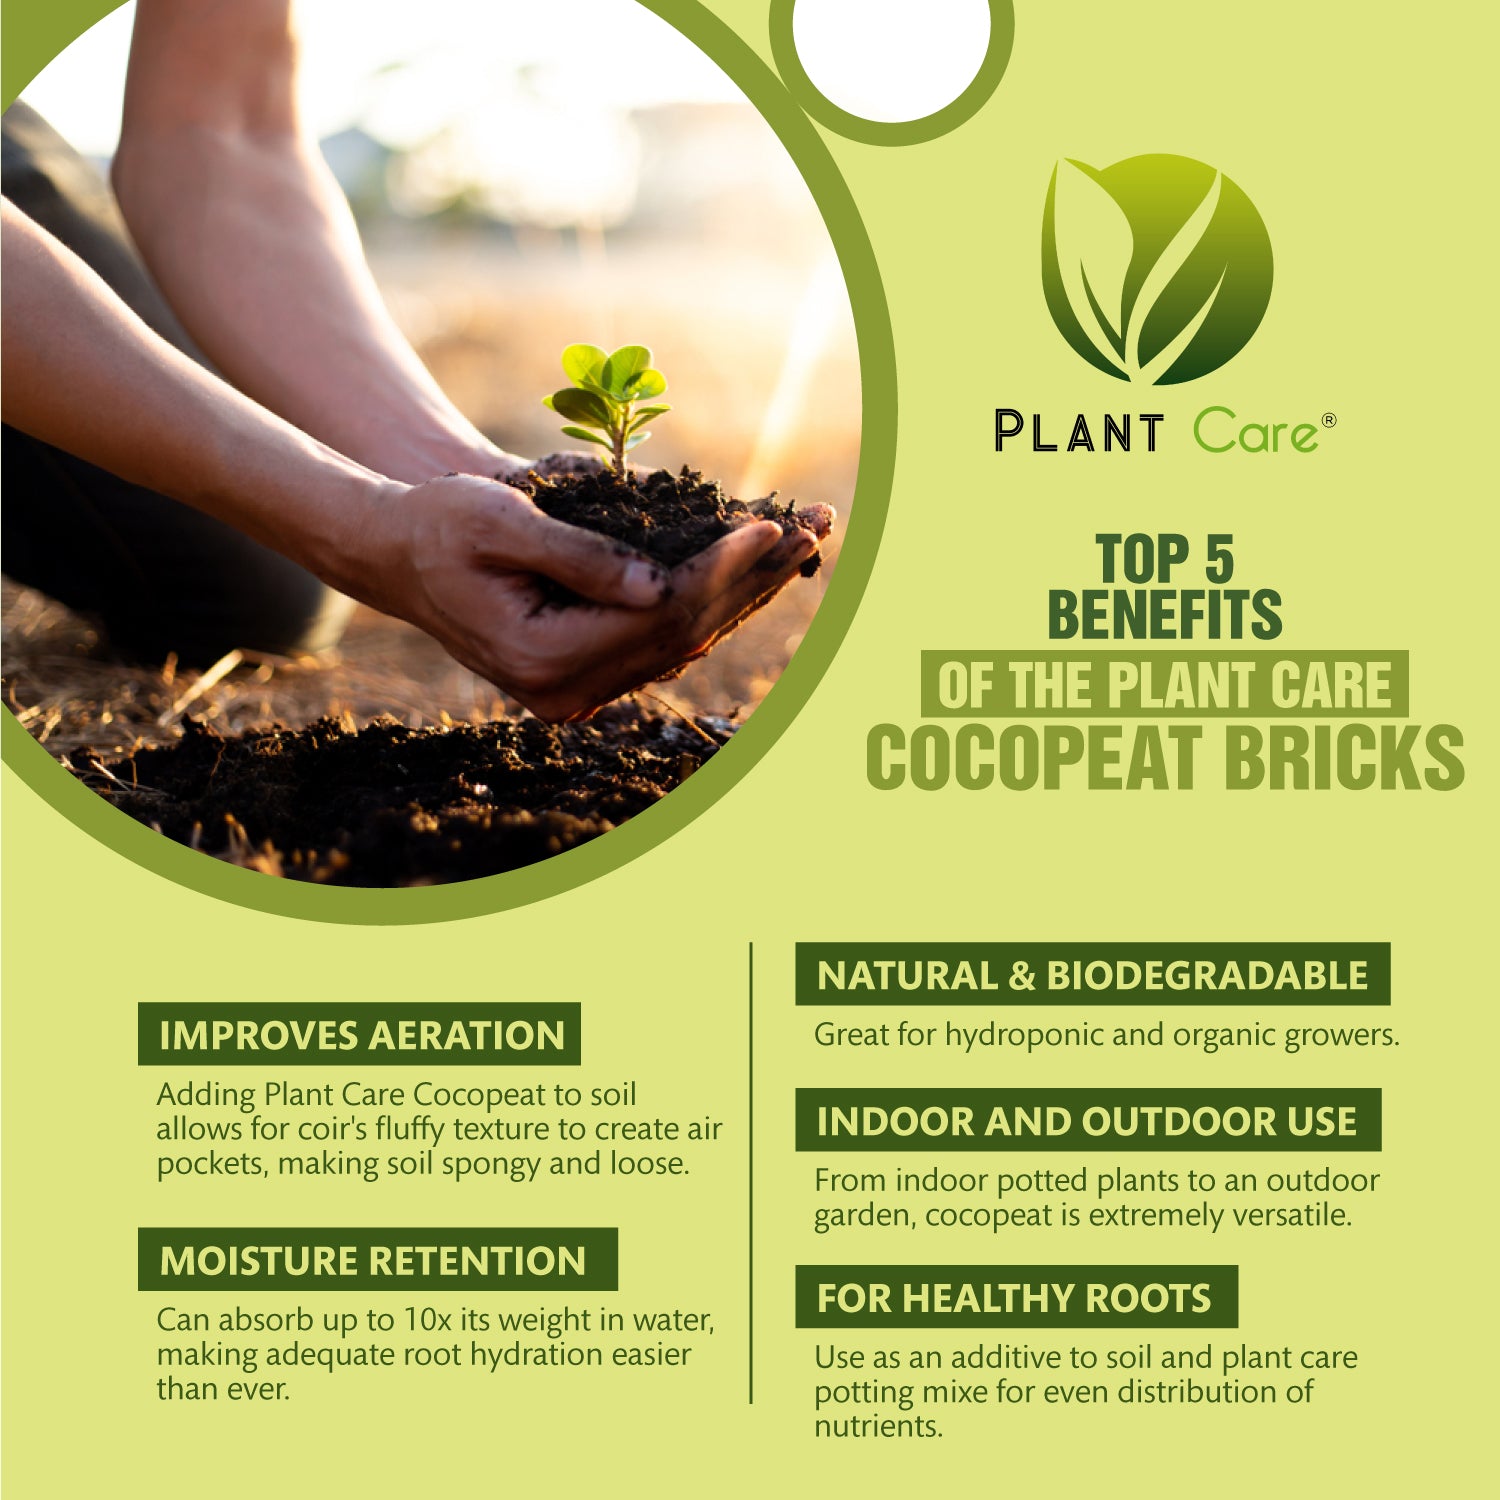 Eco-friendly growing solution with our compressed Cocopeat bricks